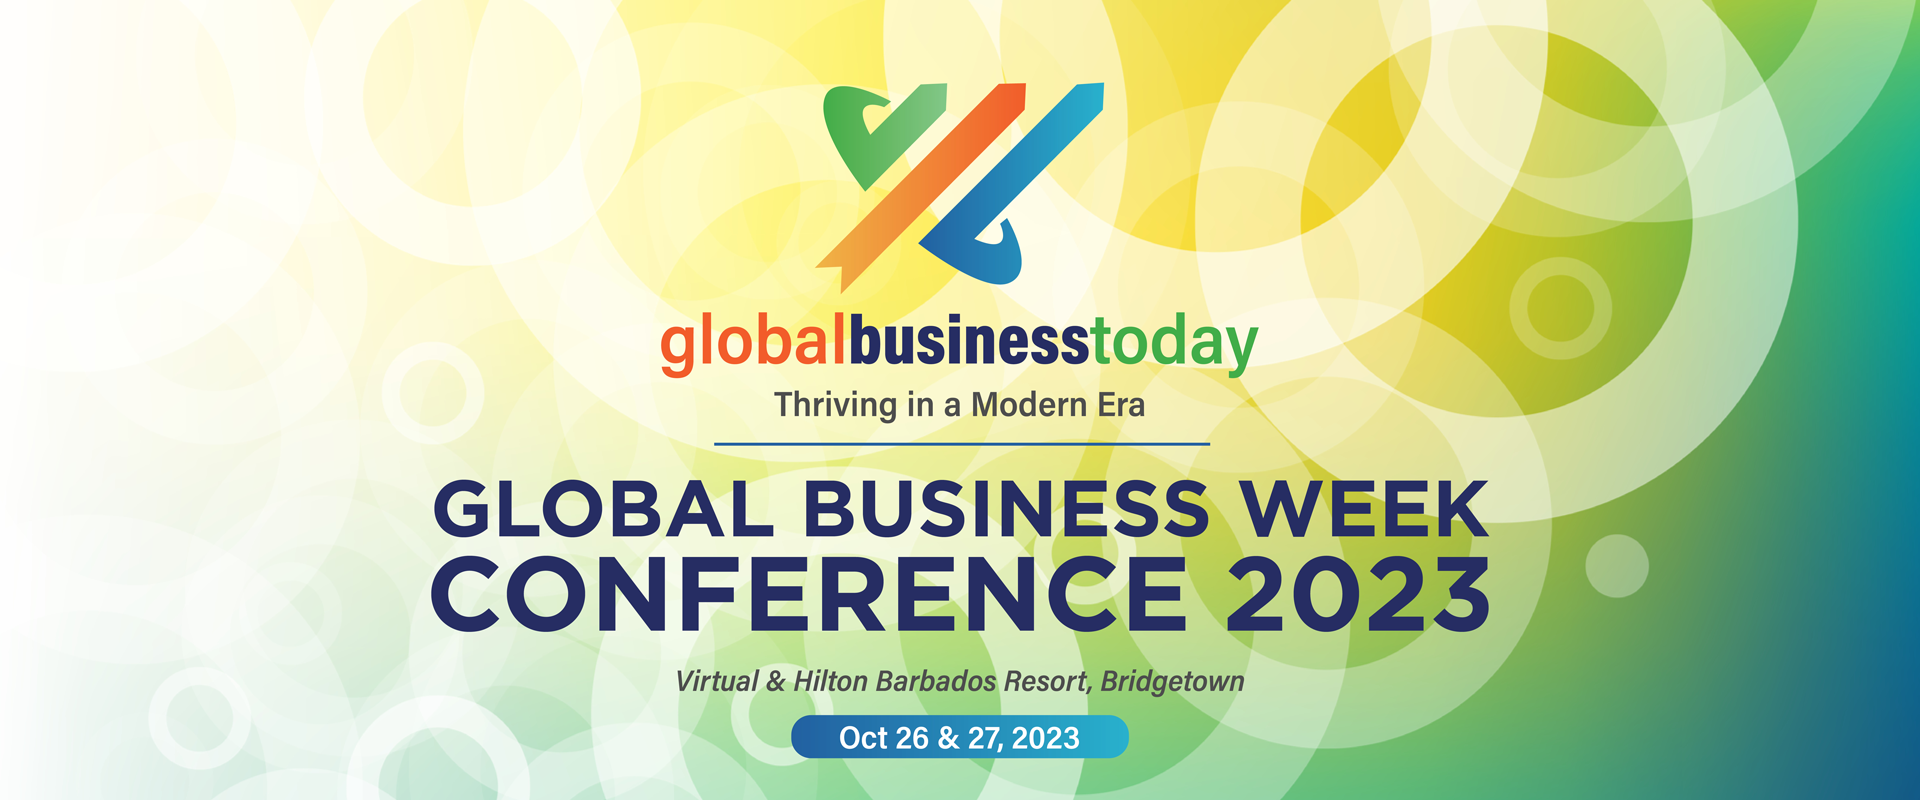 GBW Conference 2023